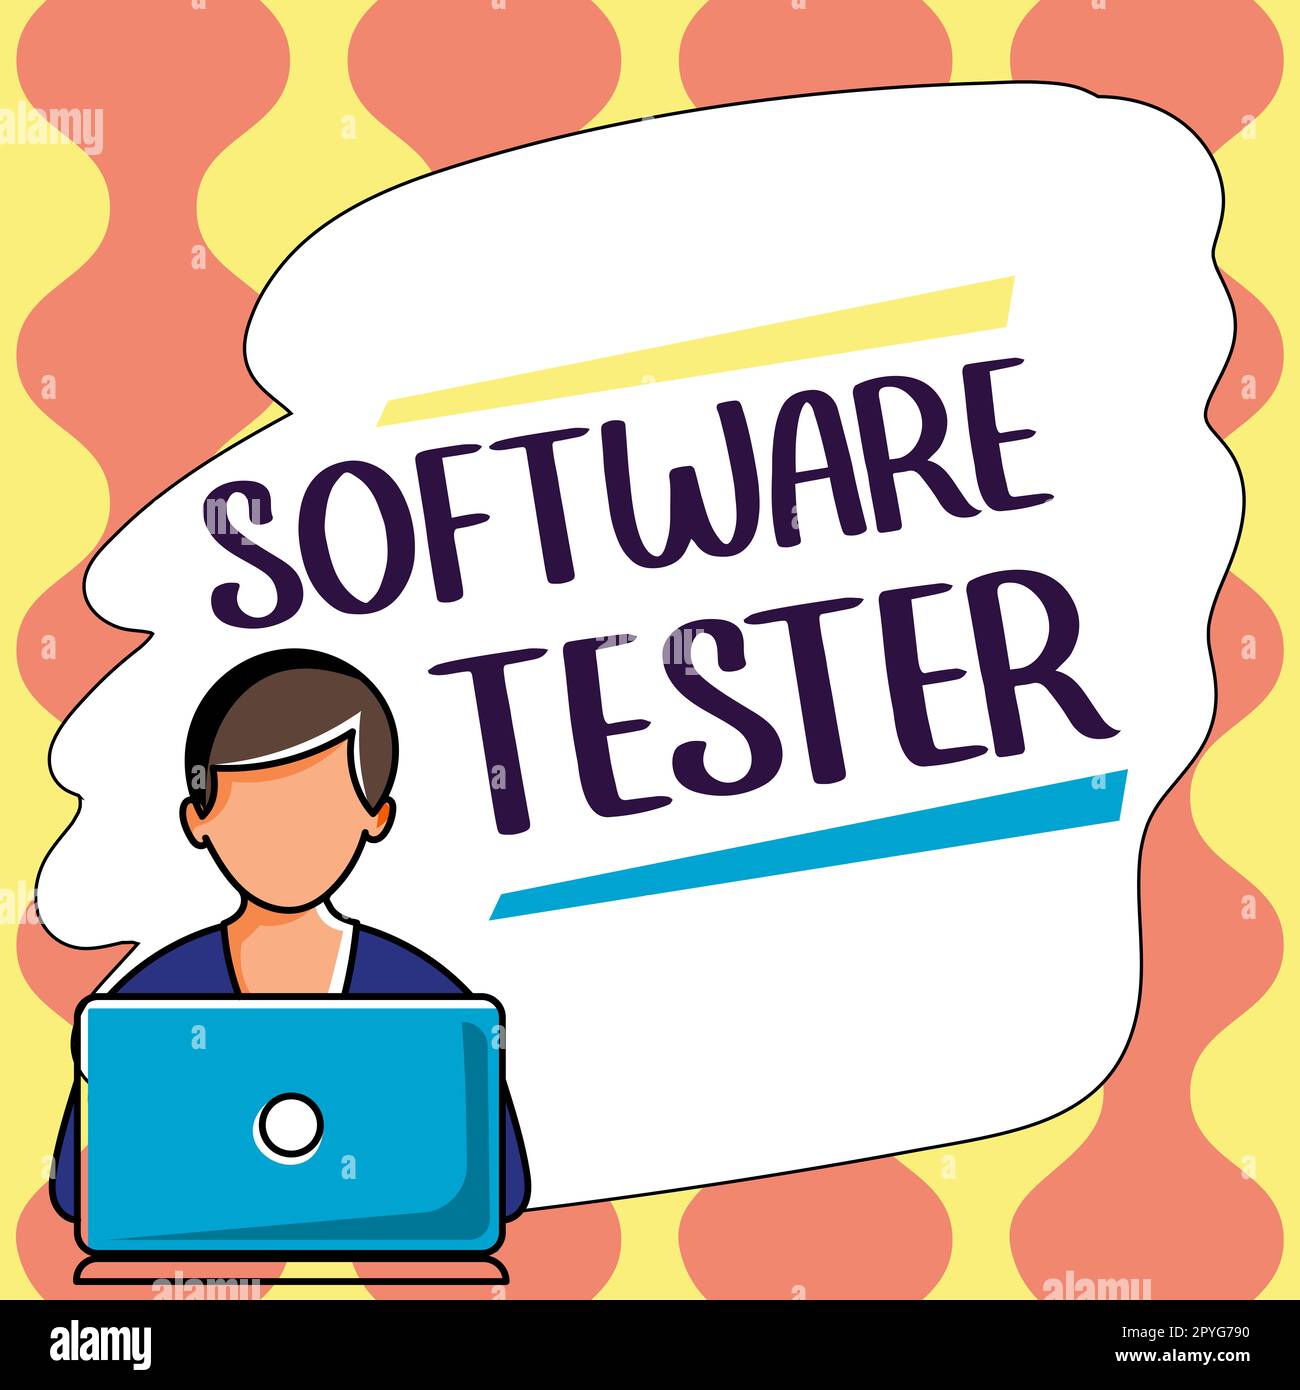 Sign displaying Software Tester. Concept meaning implemented to protect software against malicious attack Stock Photo